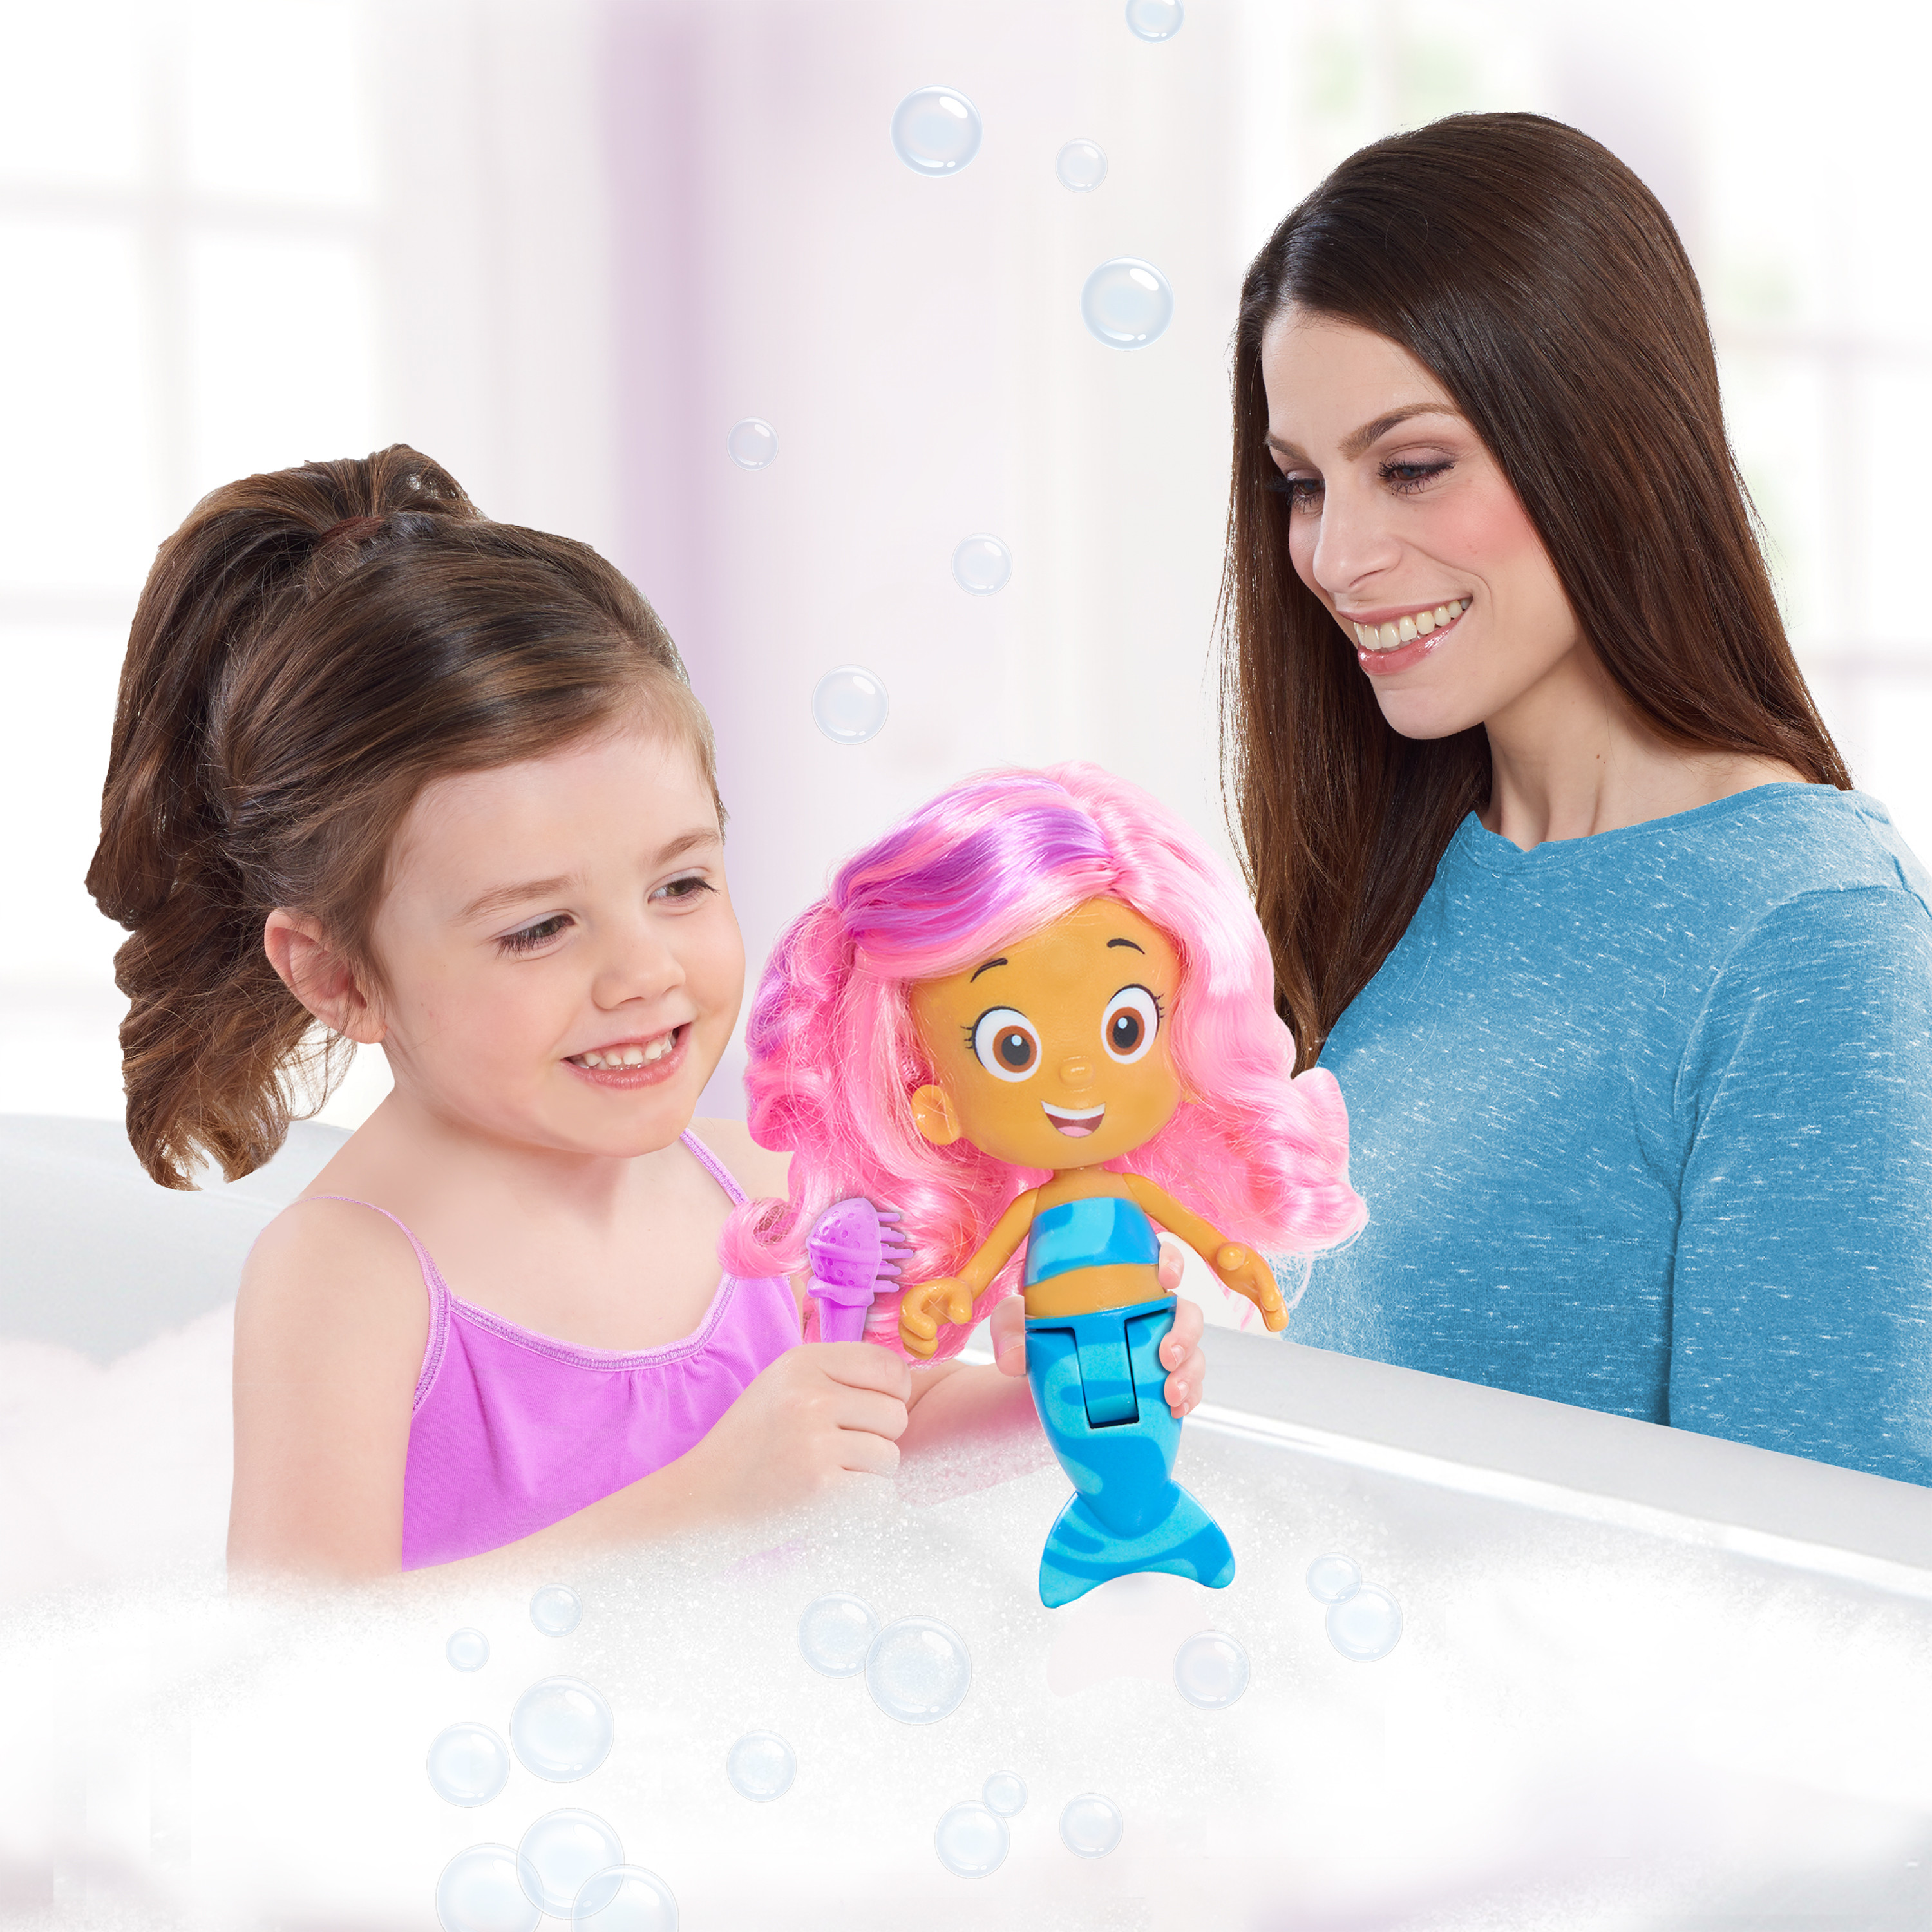 Bubble Guppies Splash and Surprise Molly Bath Doll,  Kids Toys for Ages 3 Up, Gifts and Presents - image 2 of 5